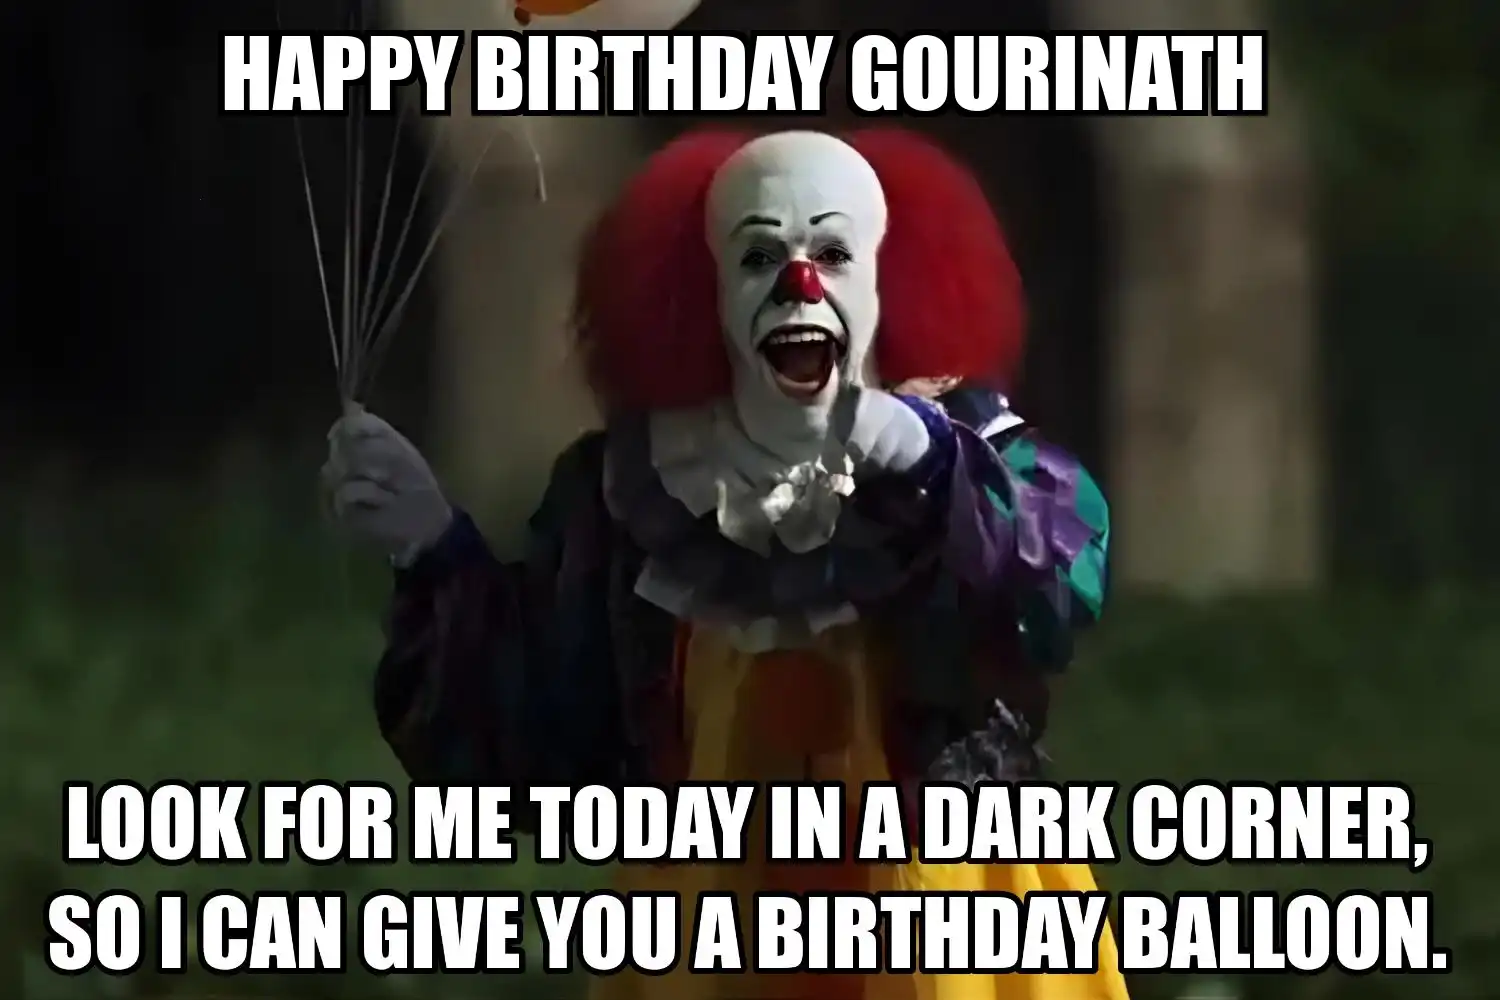 Happy Birthday Gourinath I Can Give You A Balloon Meme